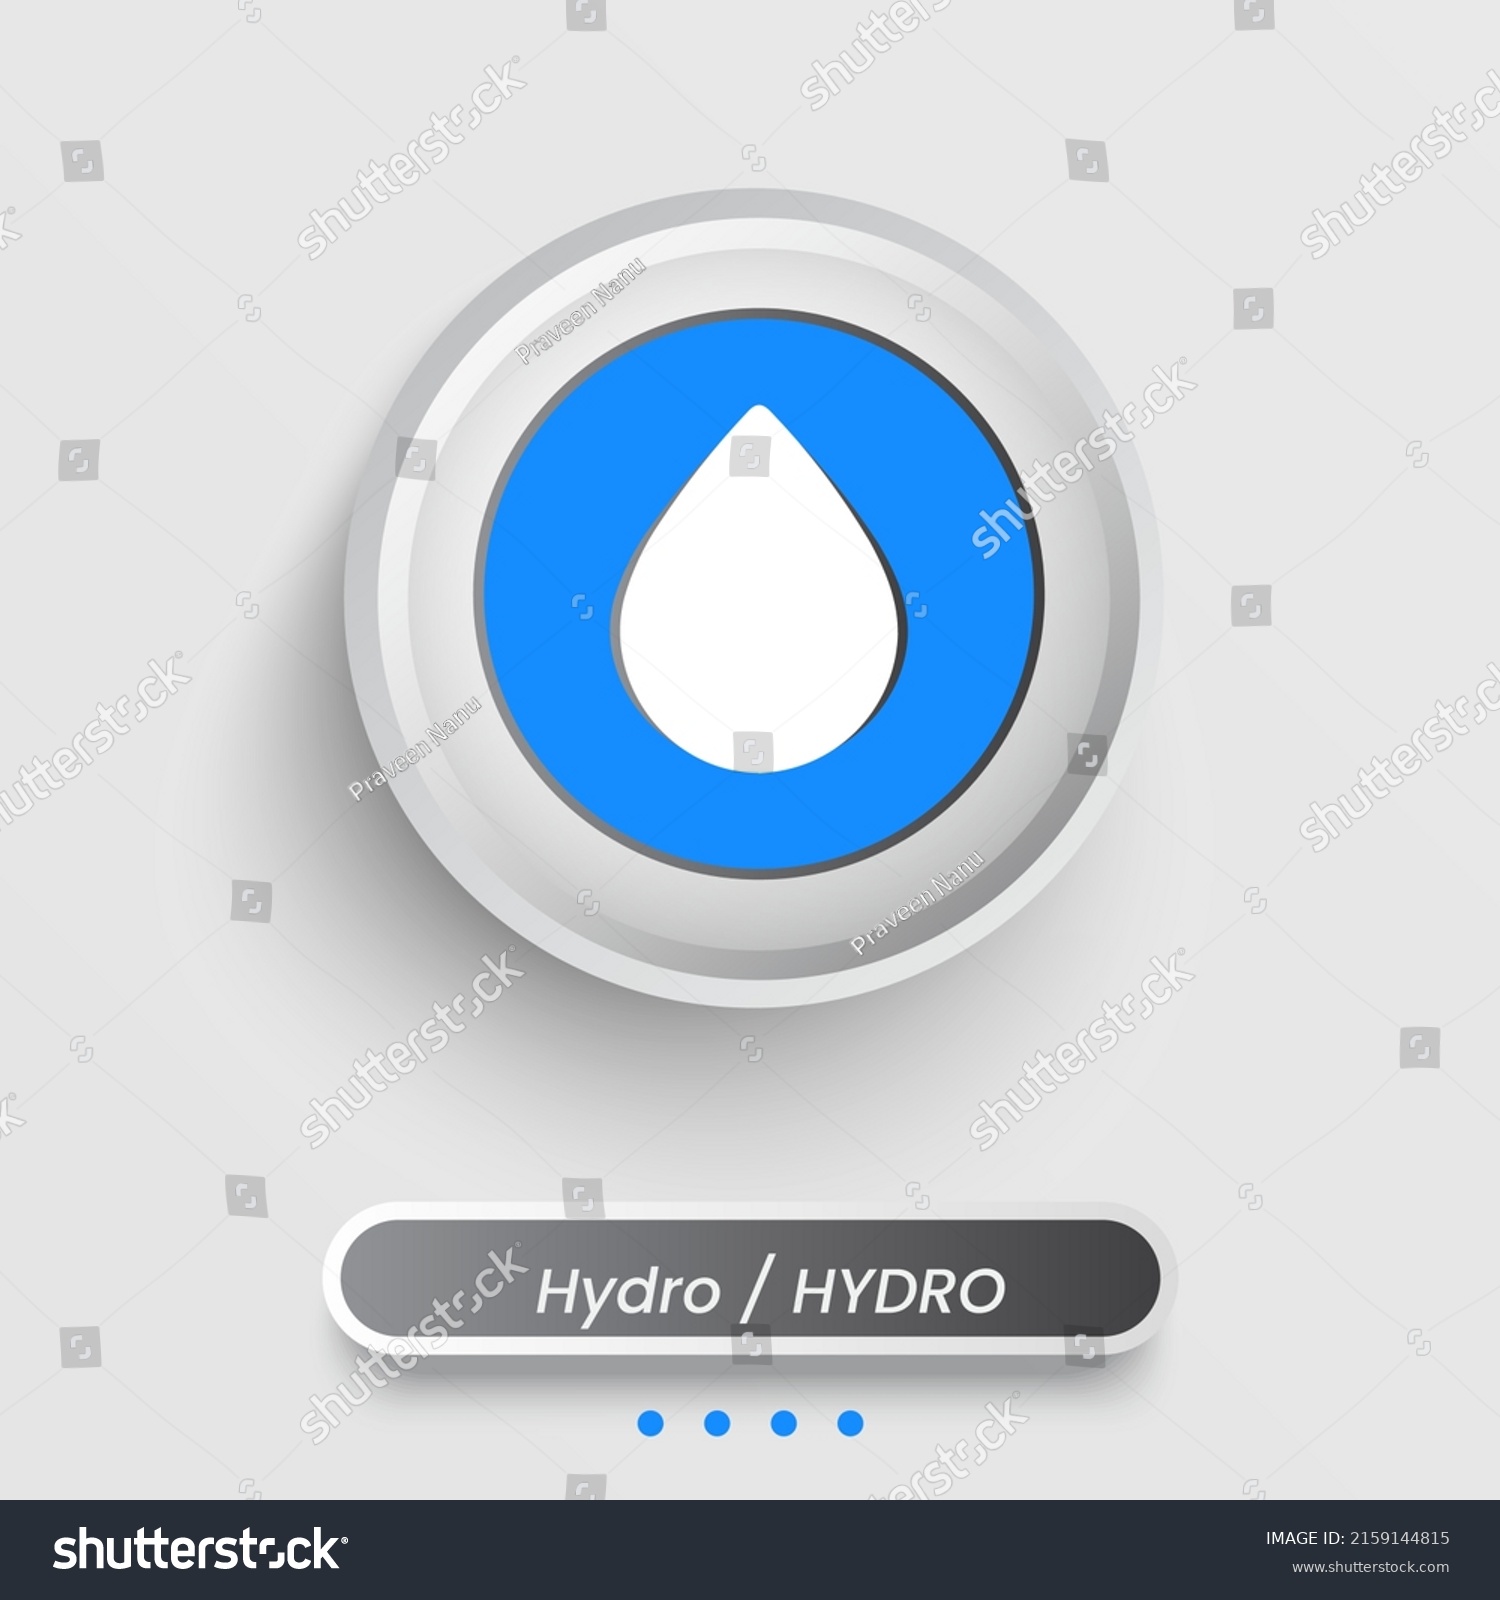 hydro crypto currency